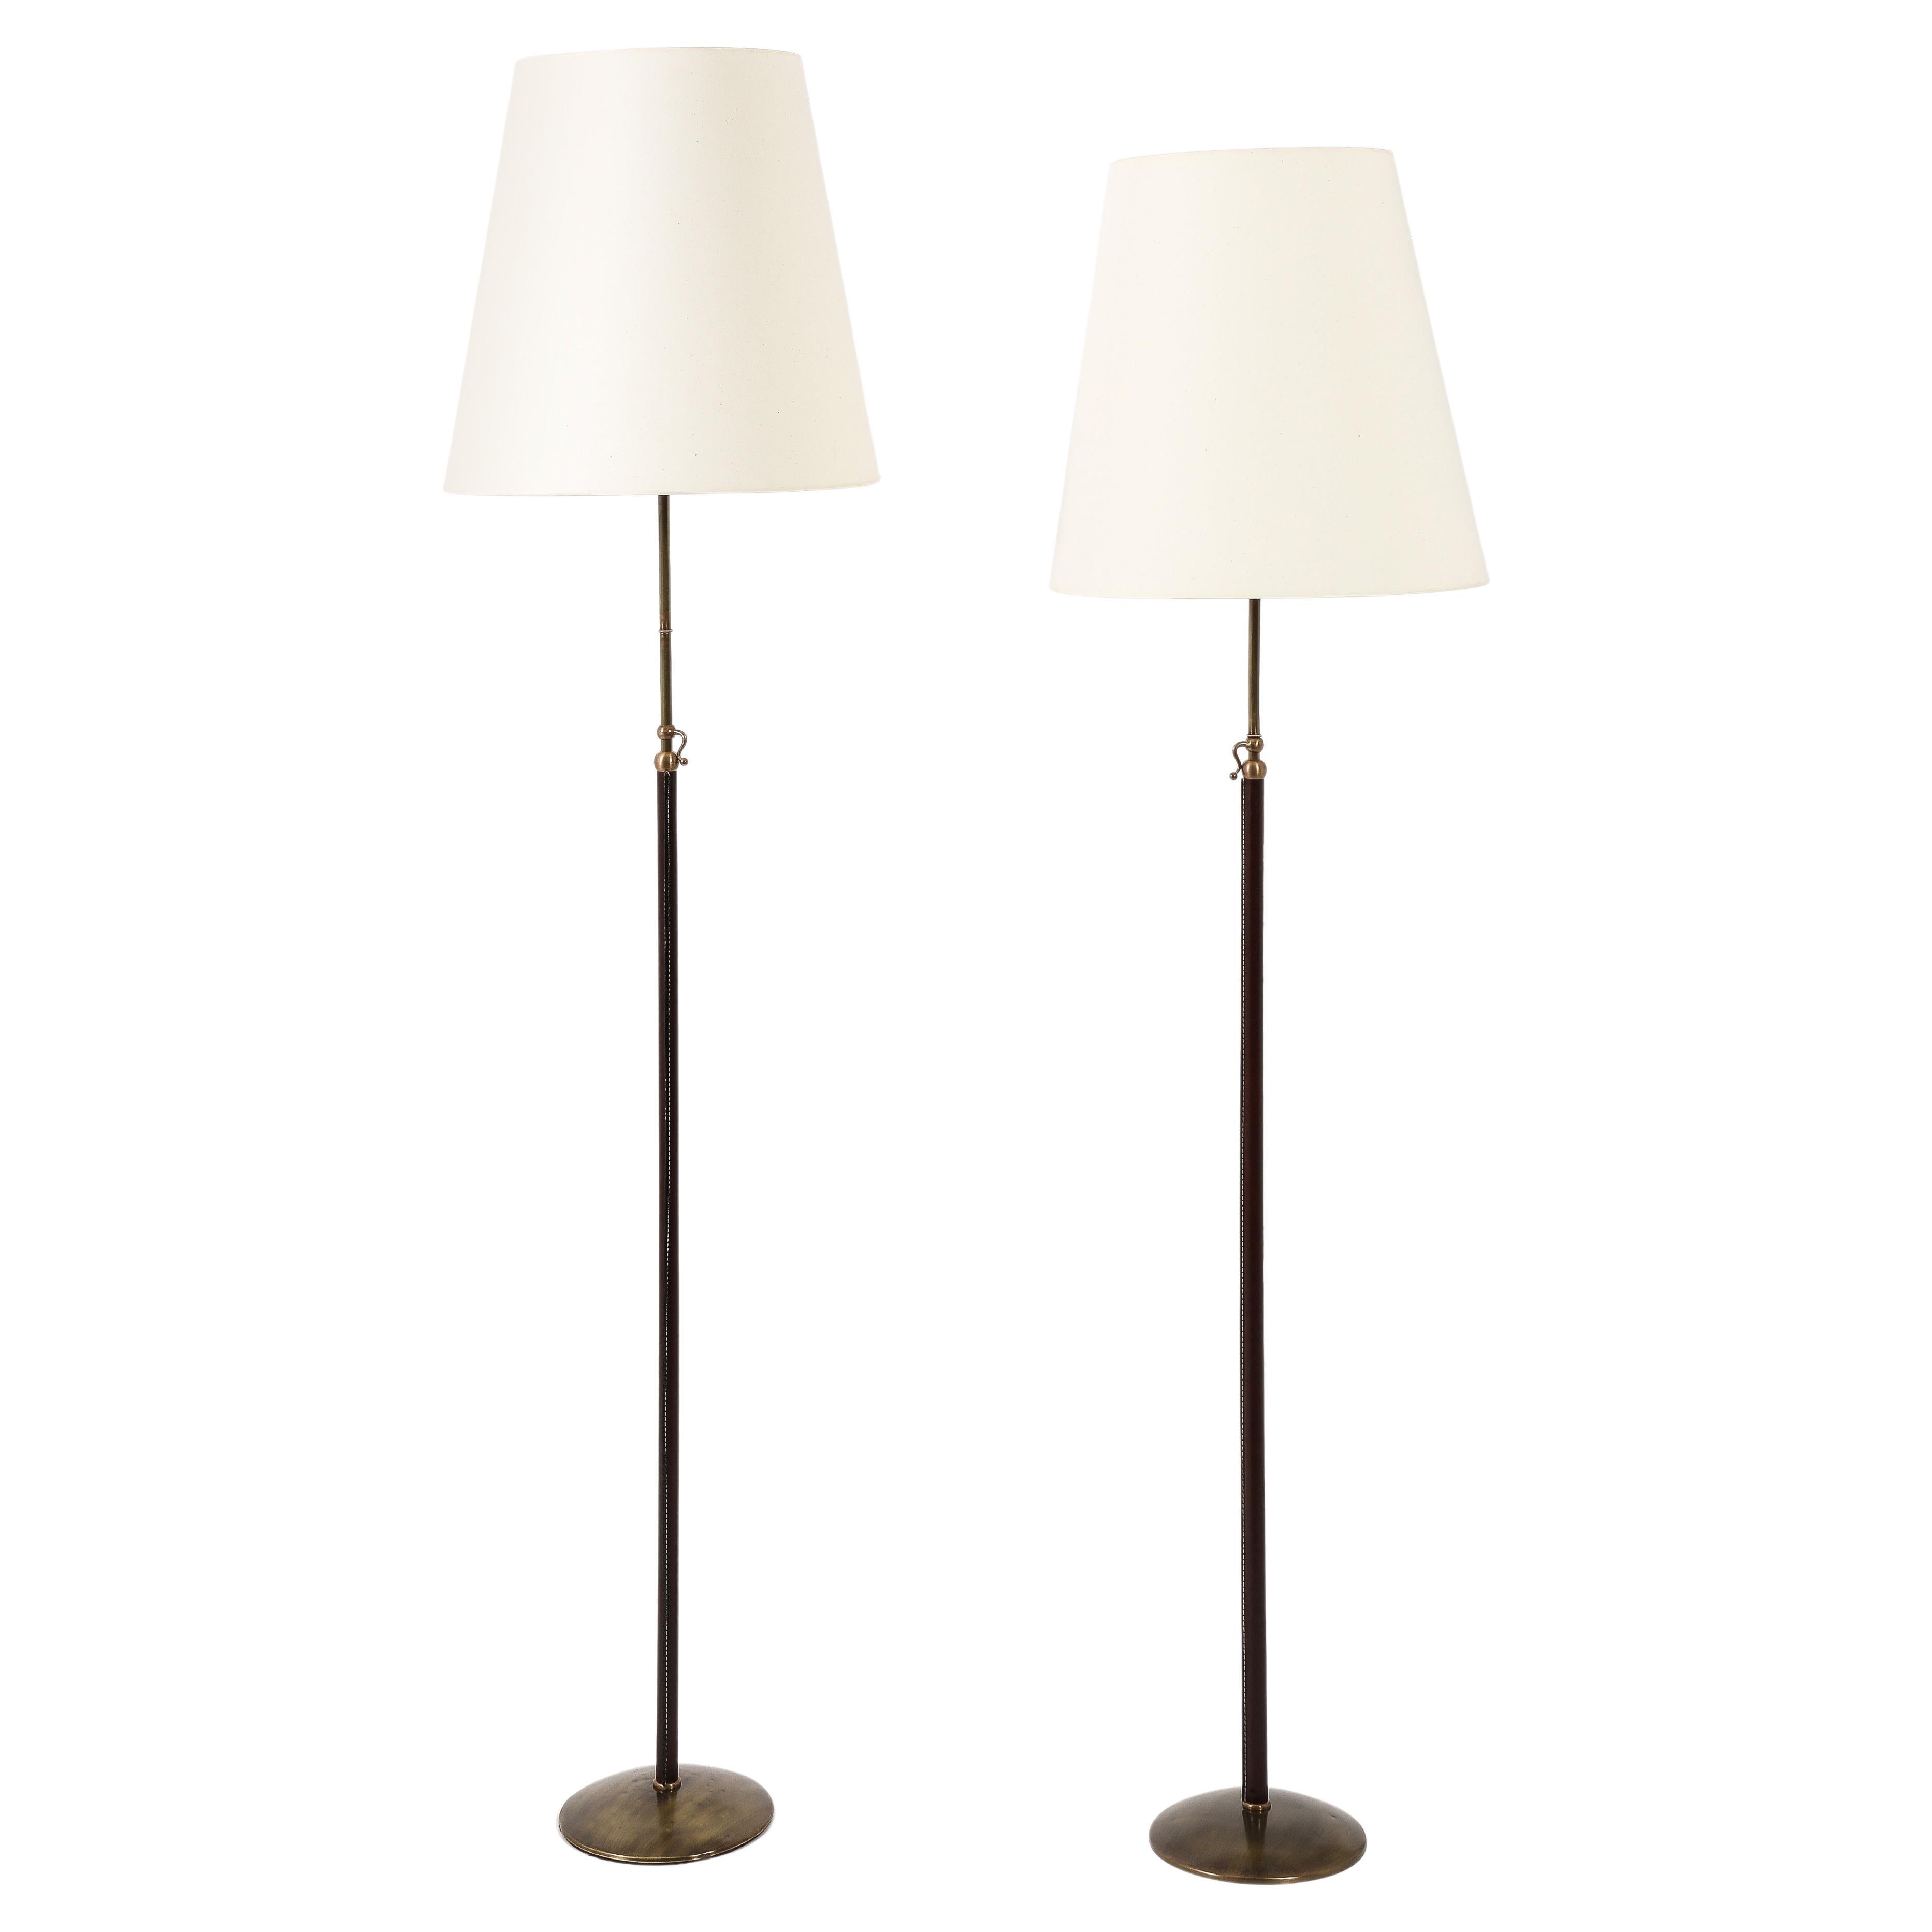 MetalArte Brass & Stitched Brown Leather Floor Lamps, Spain 1960's For Sale